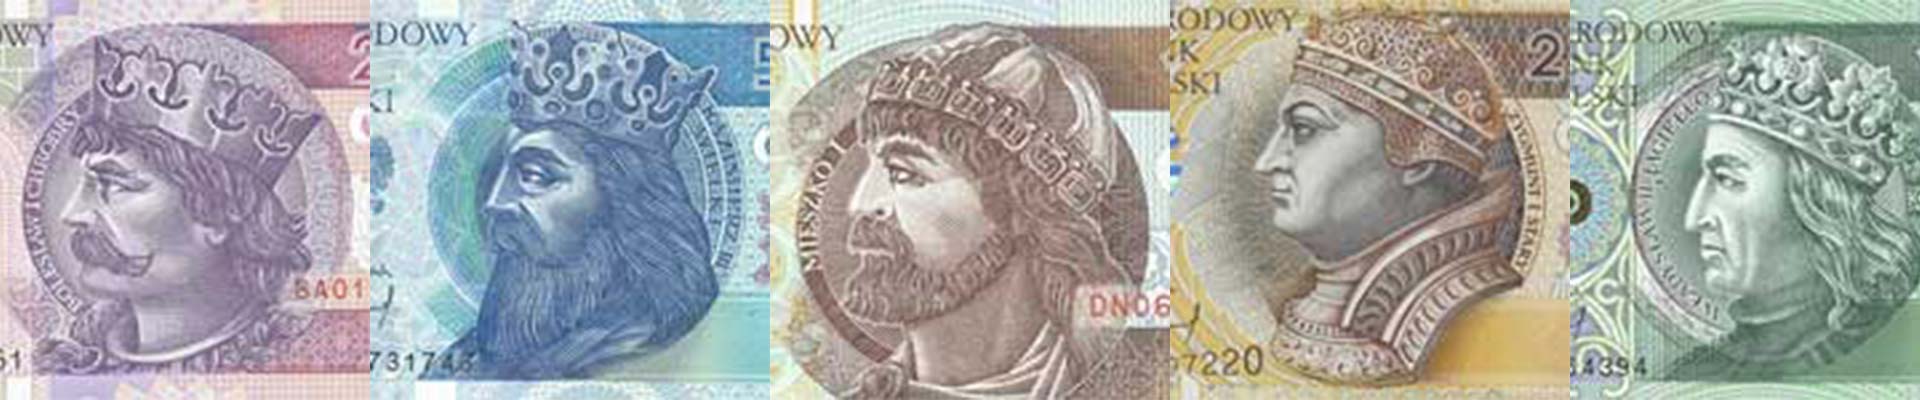 Monarchs of Poland: Portraits of the 1994 Banknote Series header image